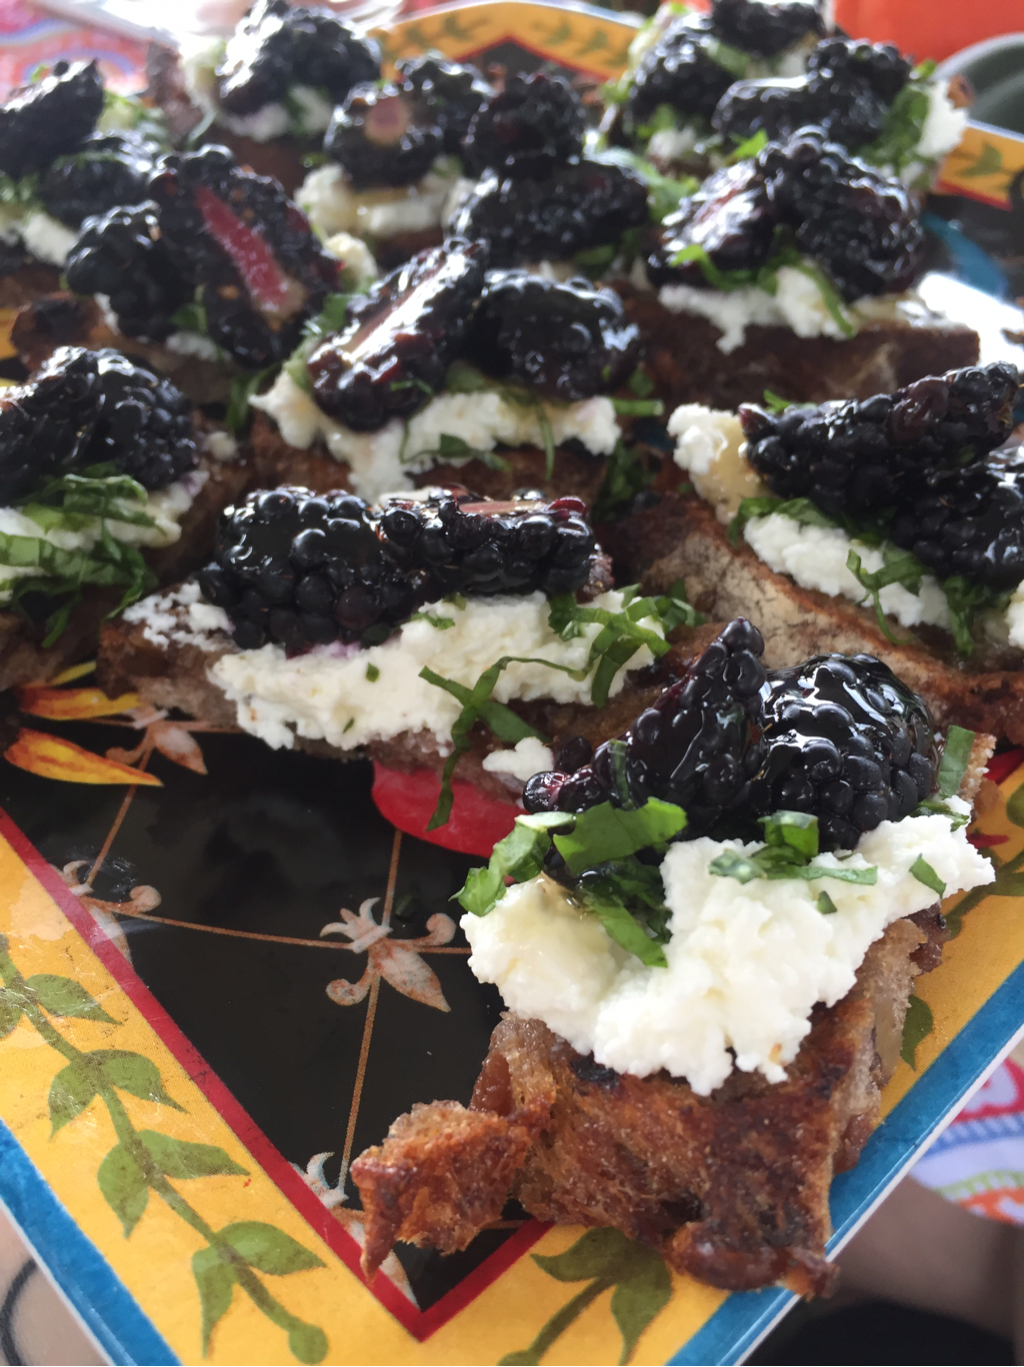 Walnut-Raisin Bread with Ricotta, Basil, Blackberries and Honey, all local finds